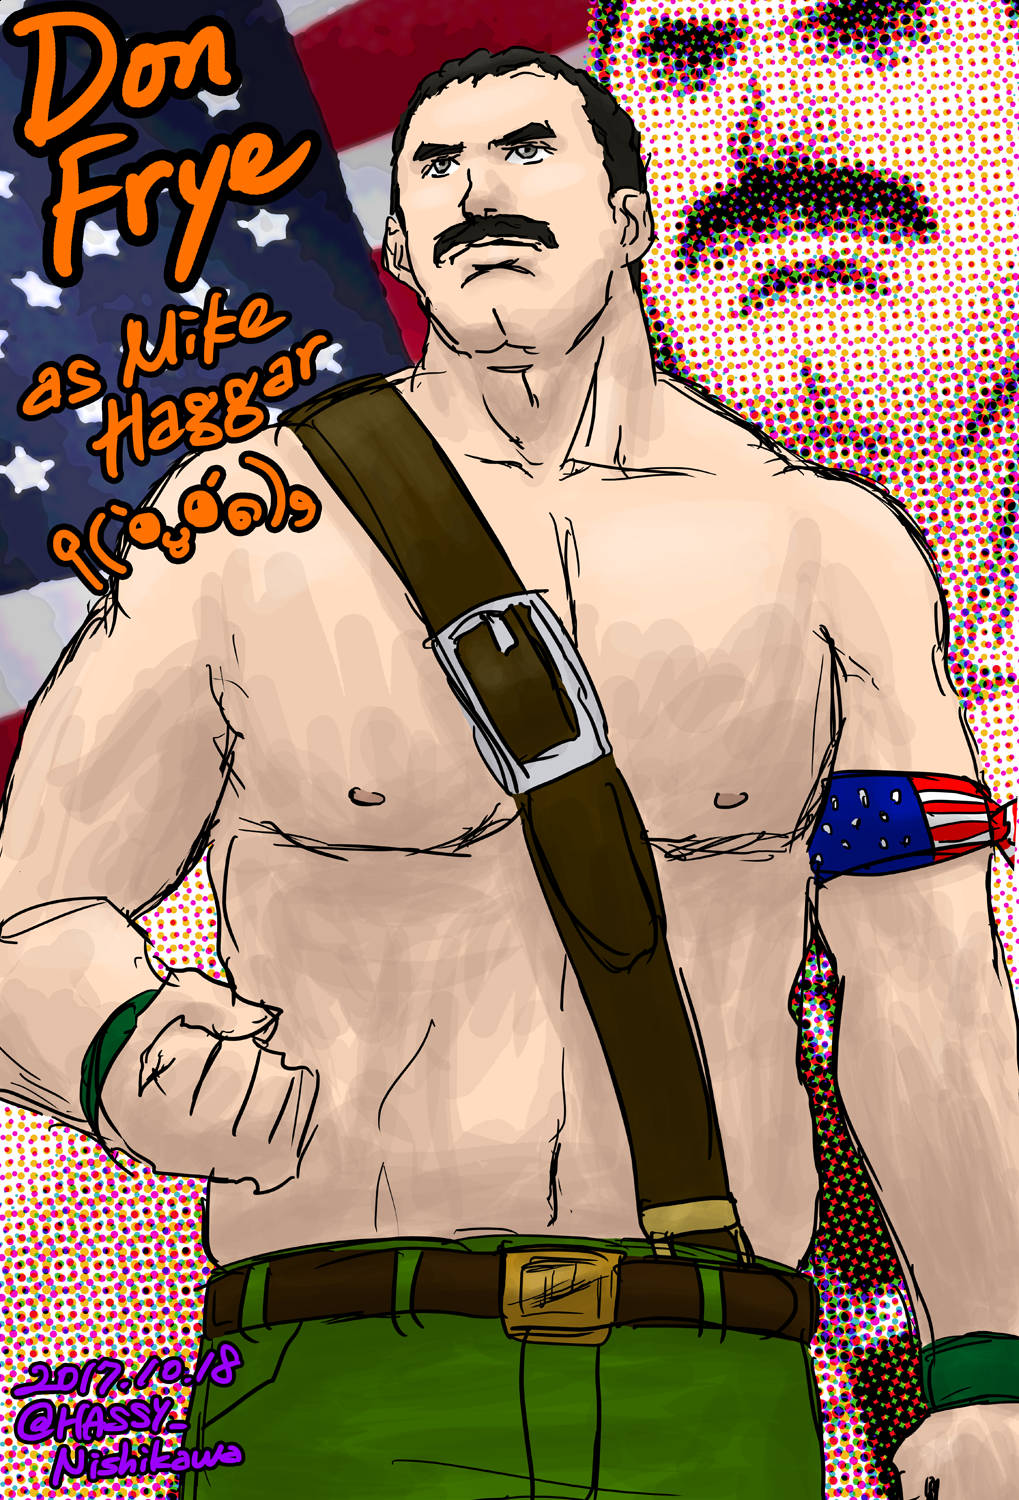 Don Frye Graphic With American Flag Wallpaper